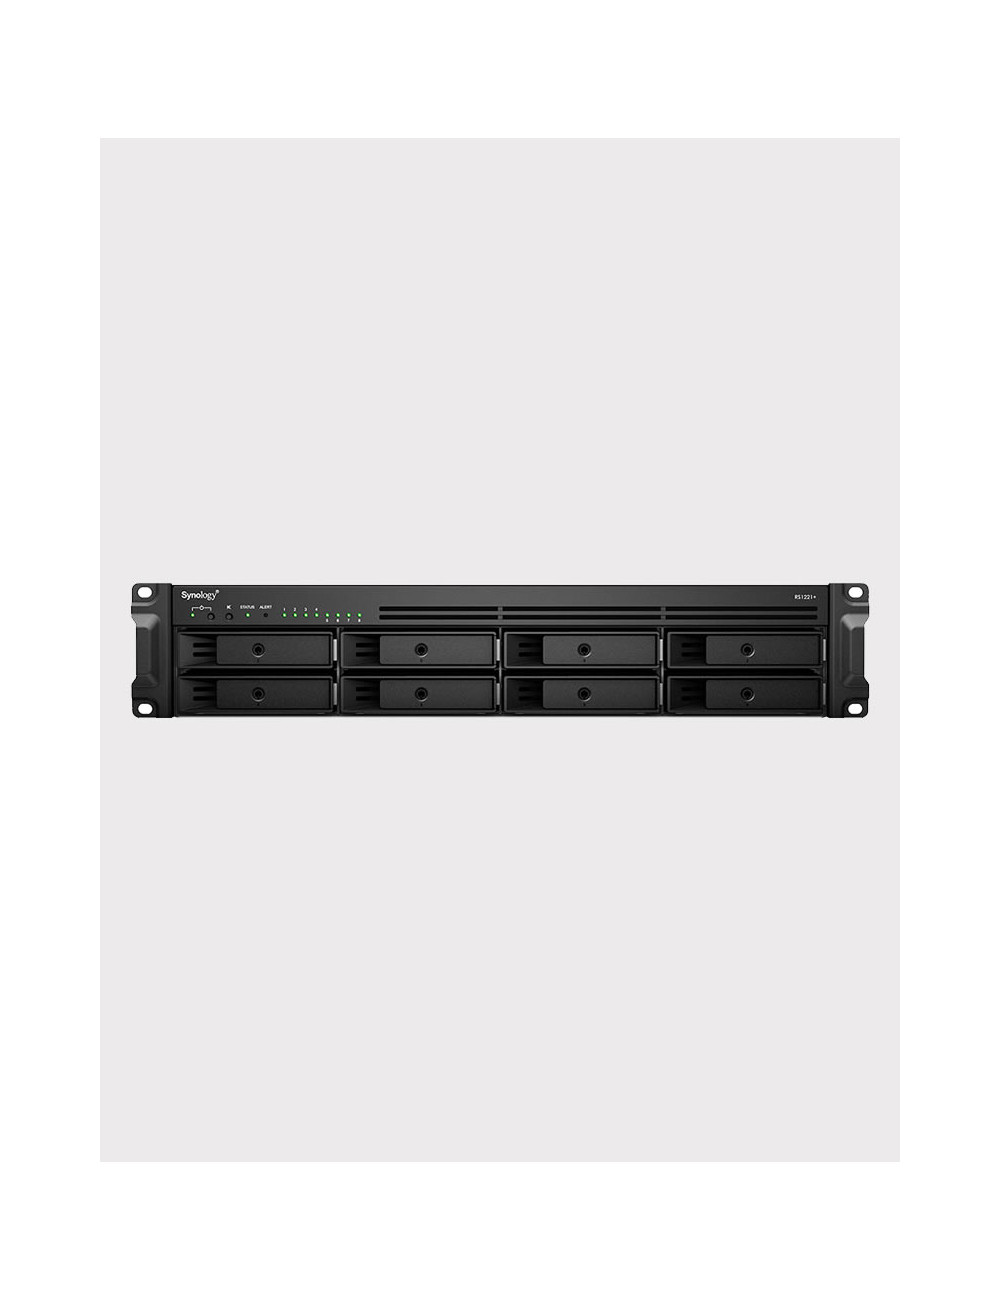 Synology DS418play Serveur NAS - SATA 6Gb/s - 16 To